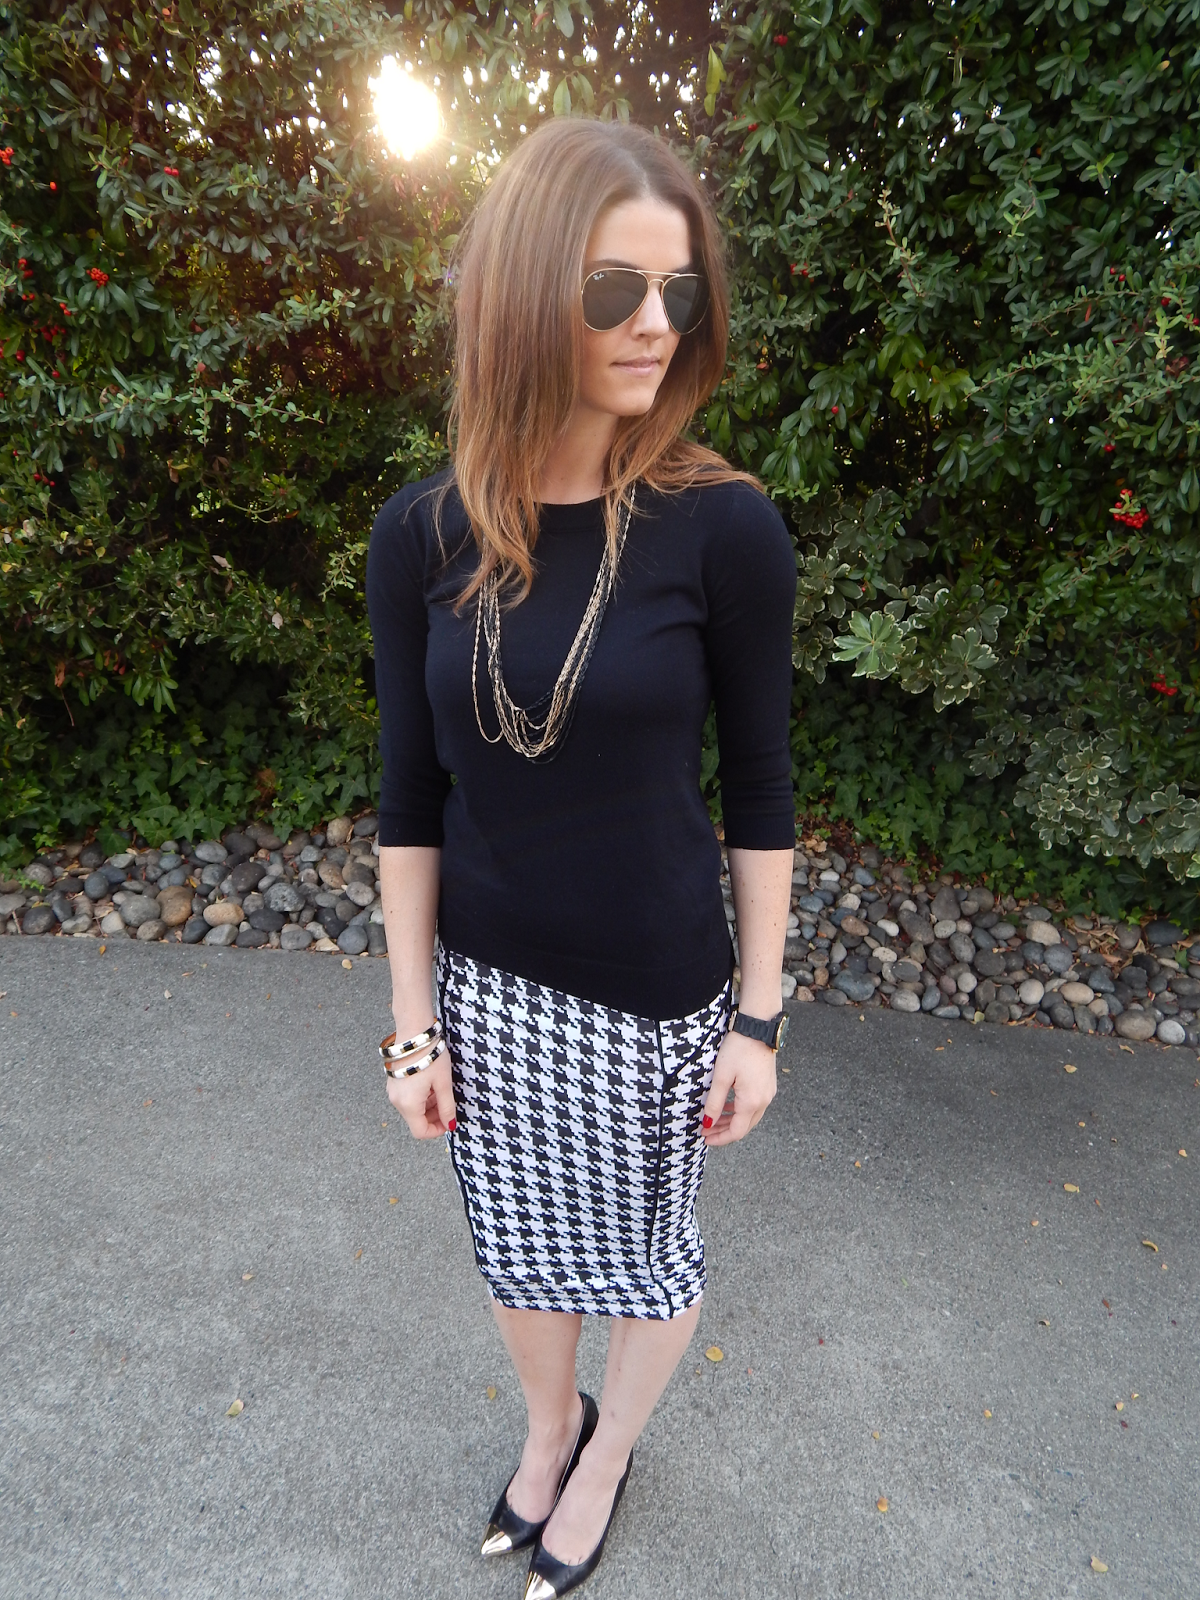 City Girl Meets Country Blog: Pencil Skirt